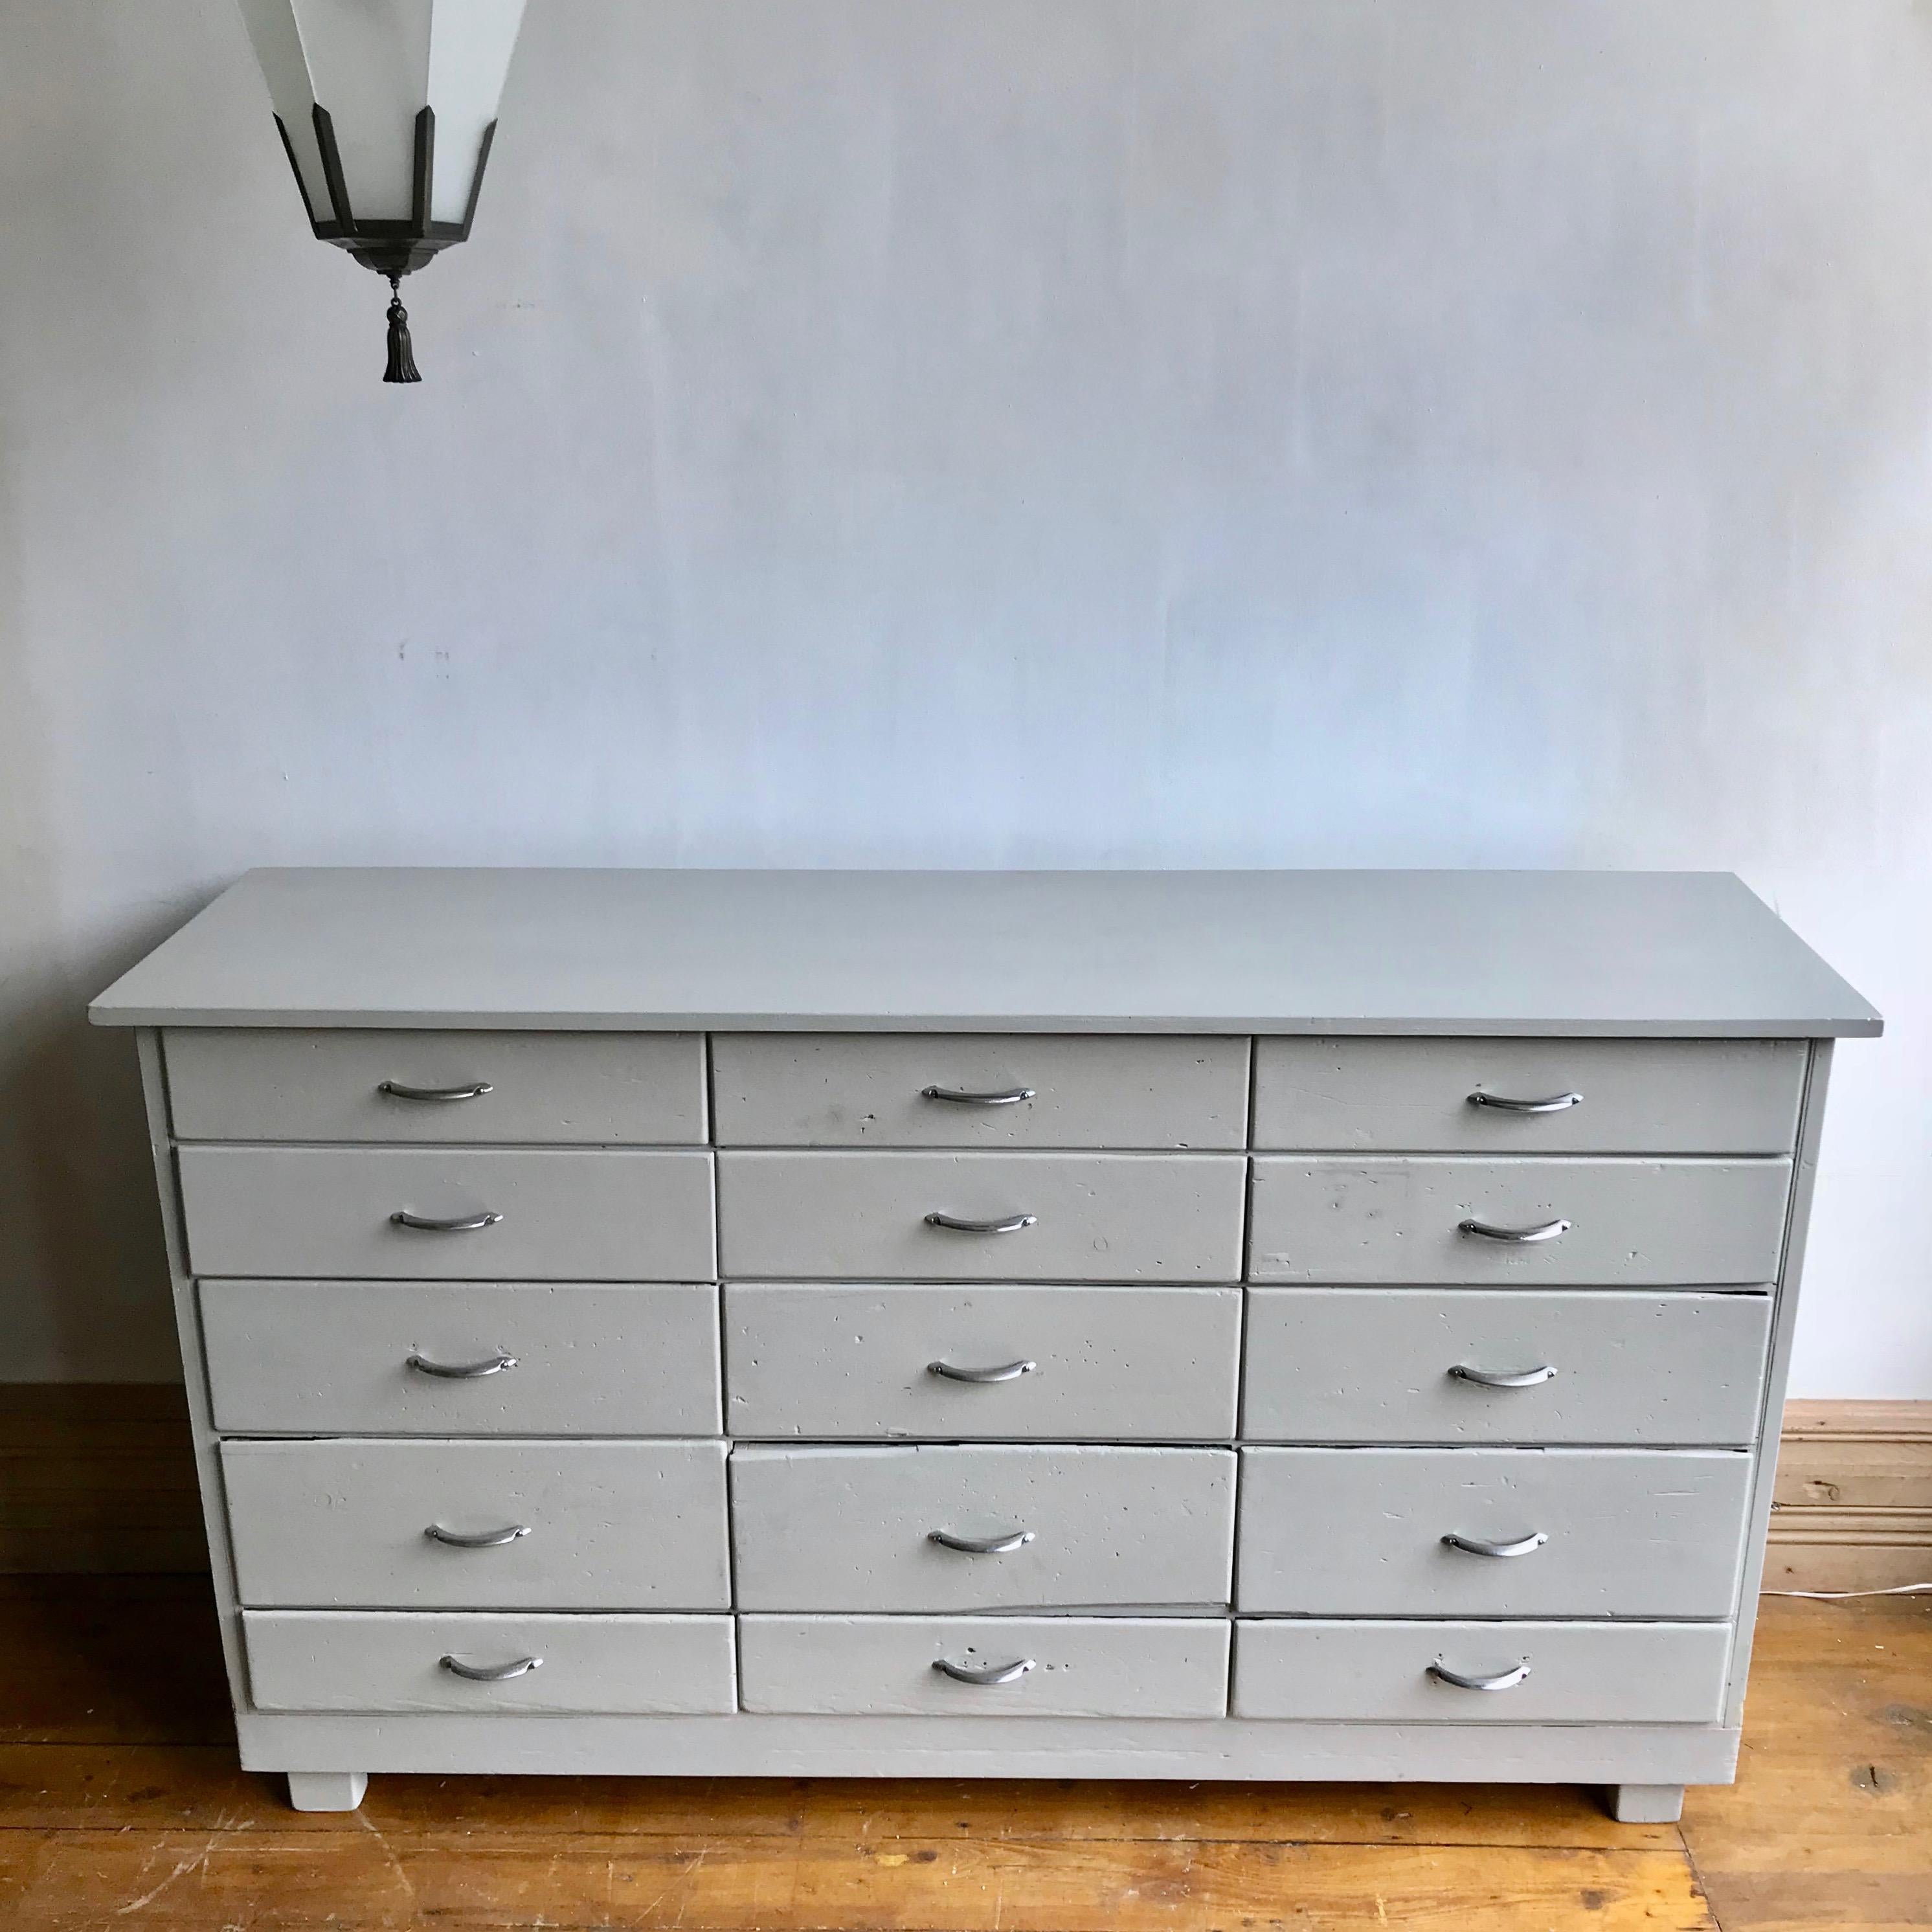 A 15-drawer bank of drawers painted in grey and then lacquered. With the original chromed midcentury handles.
   